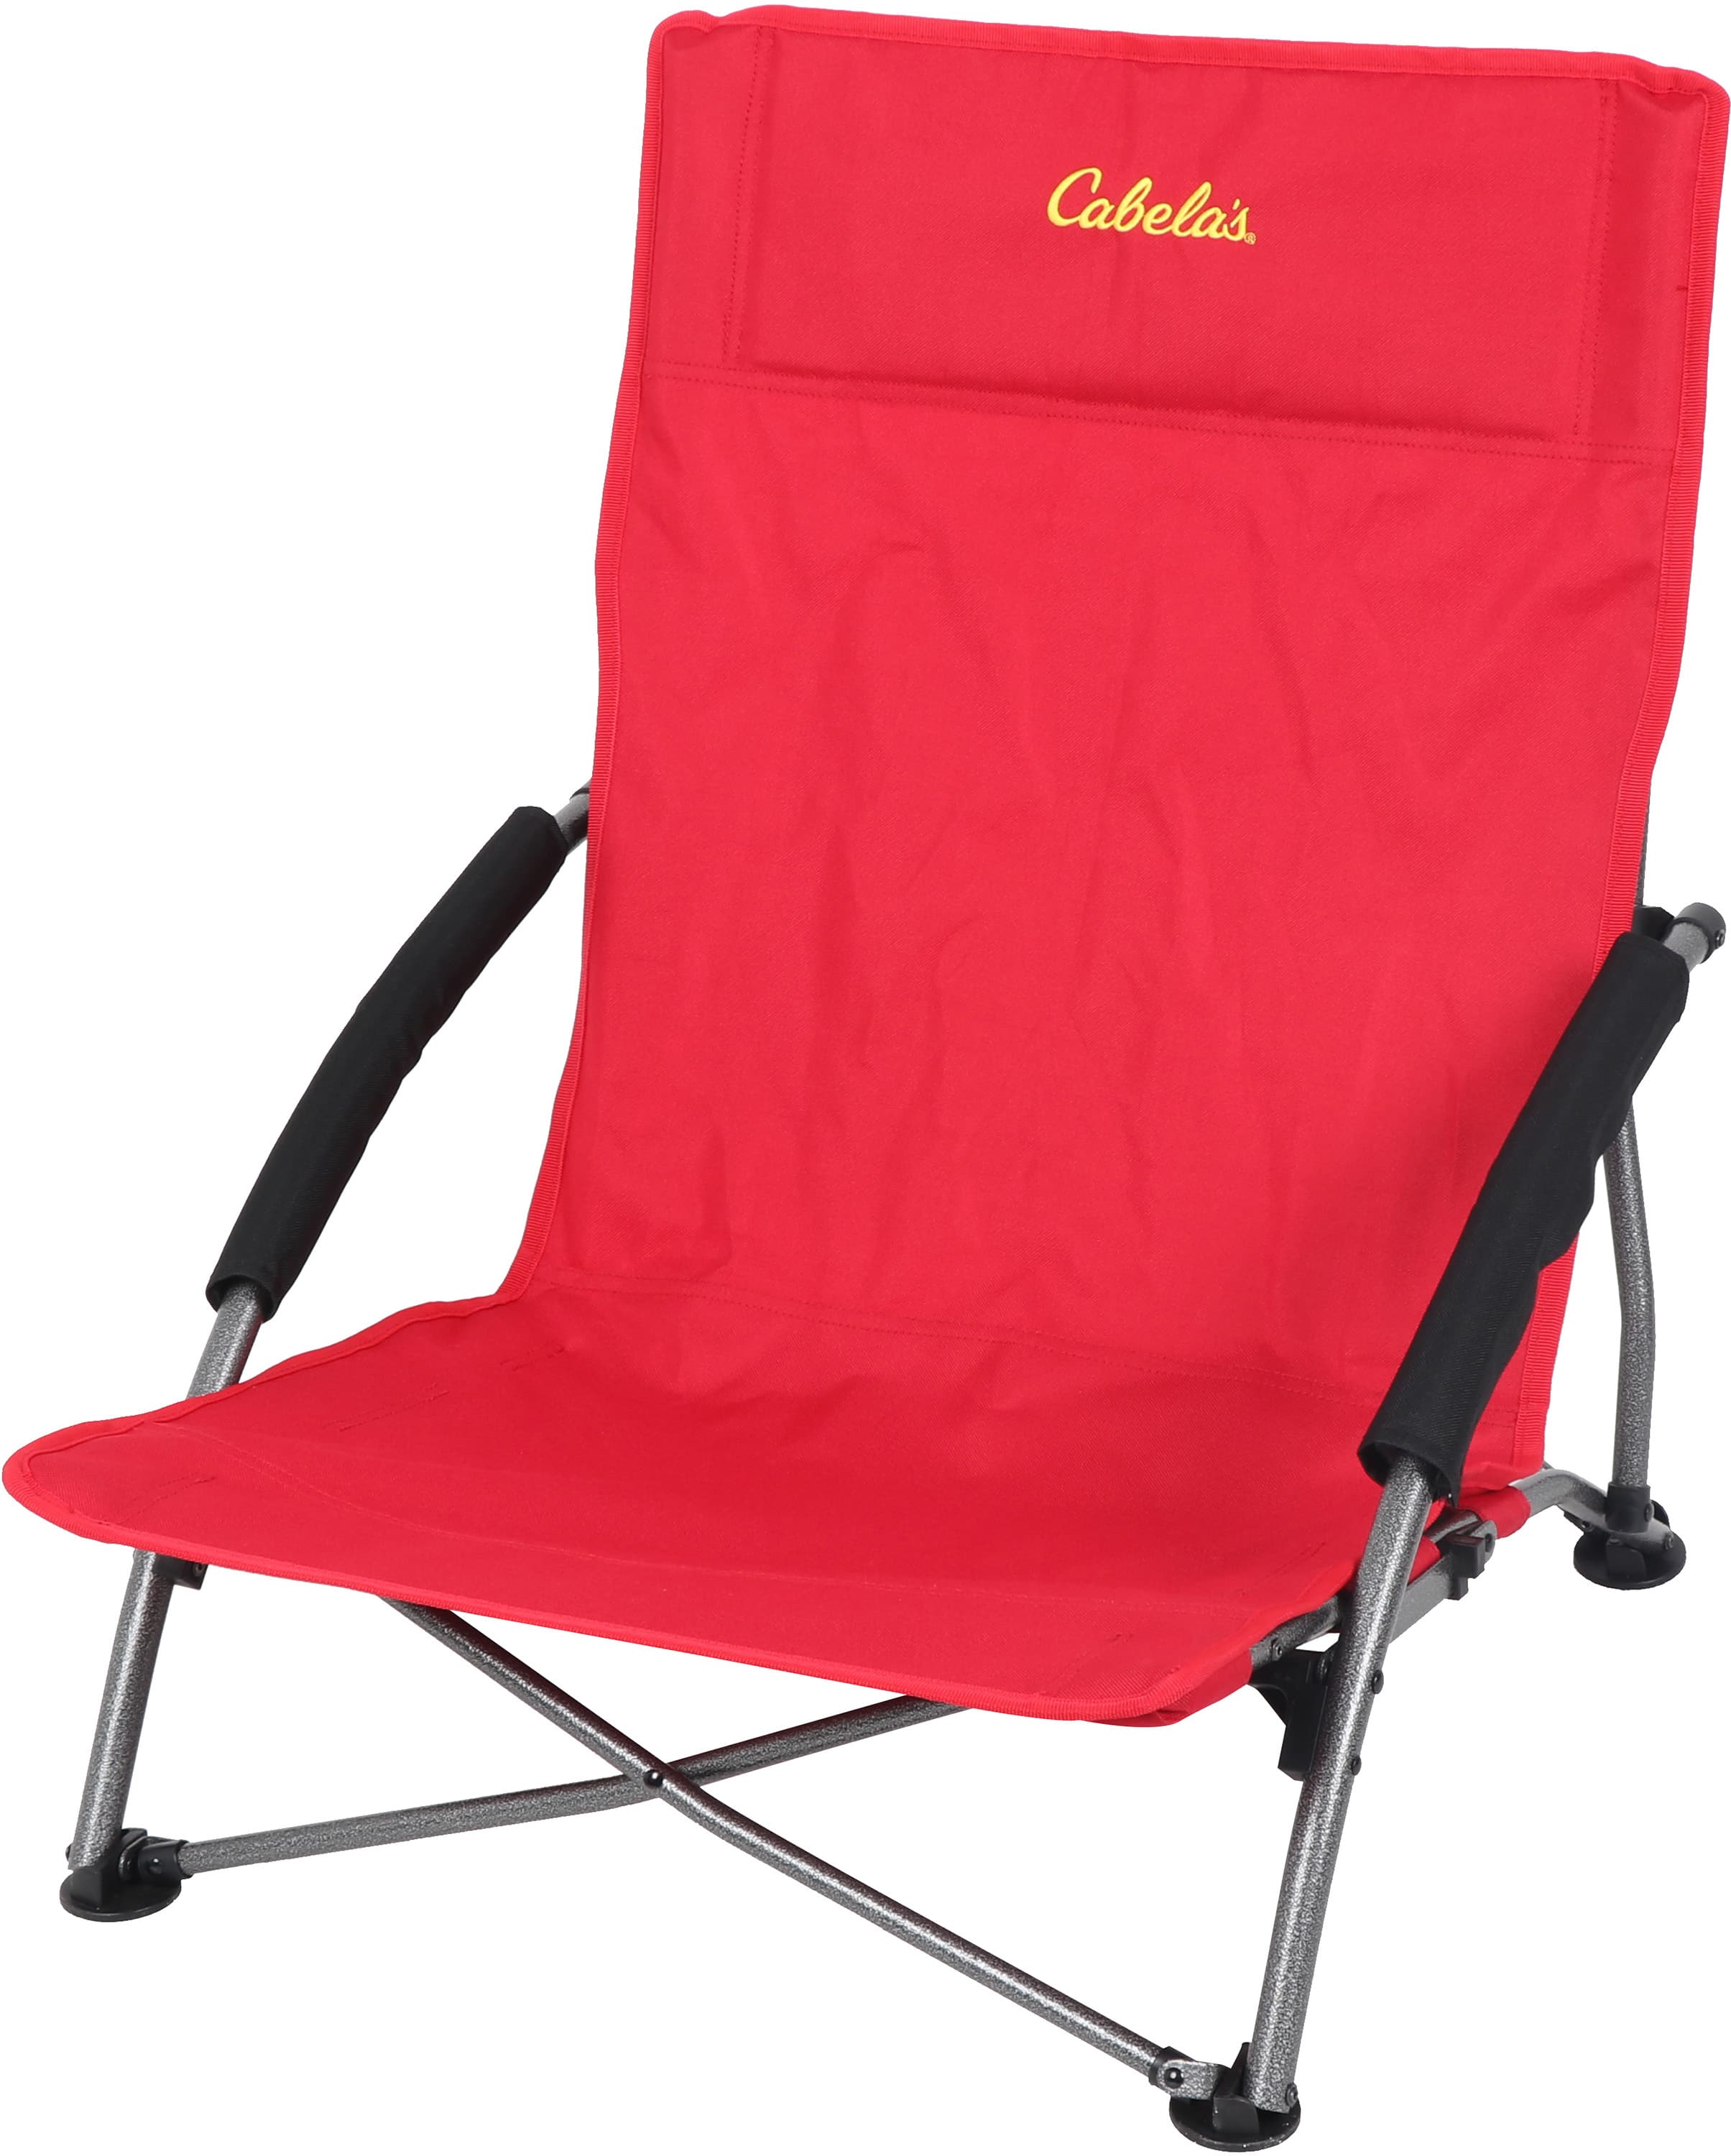 Cabela's Event Chair - Red